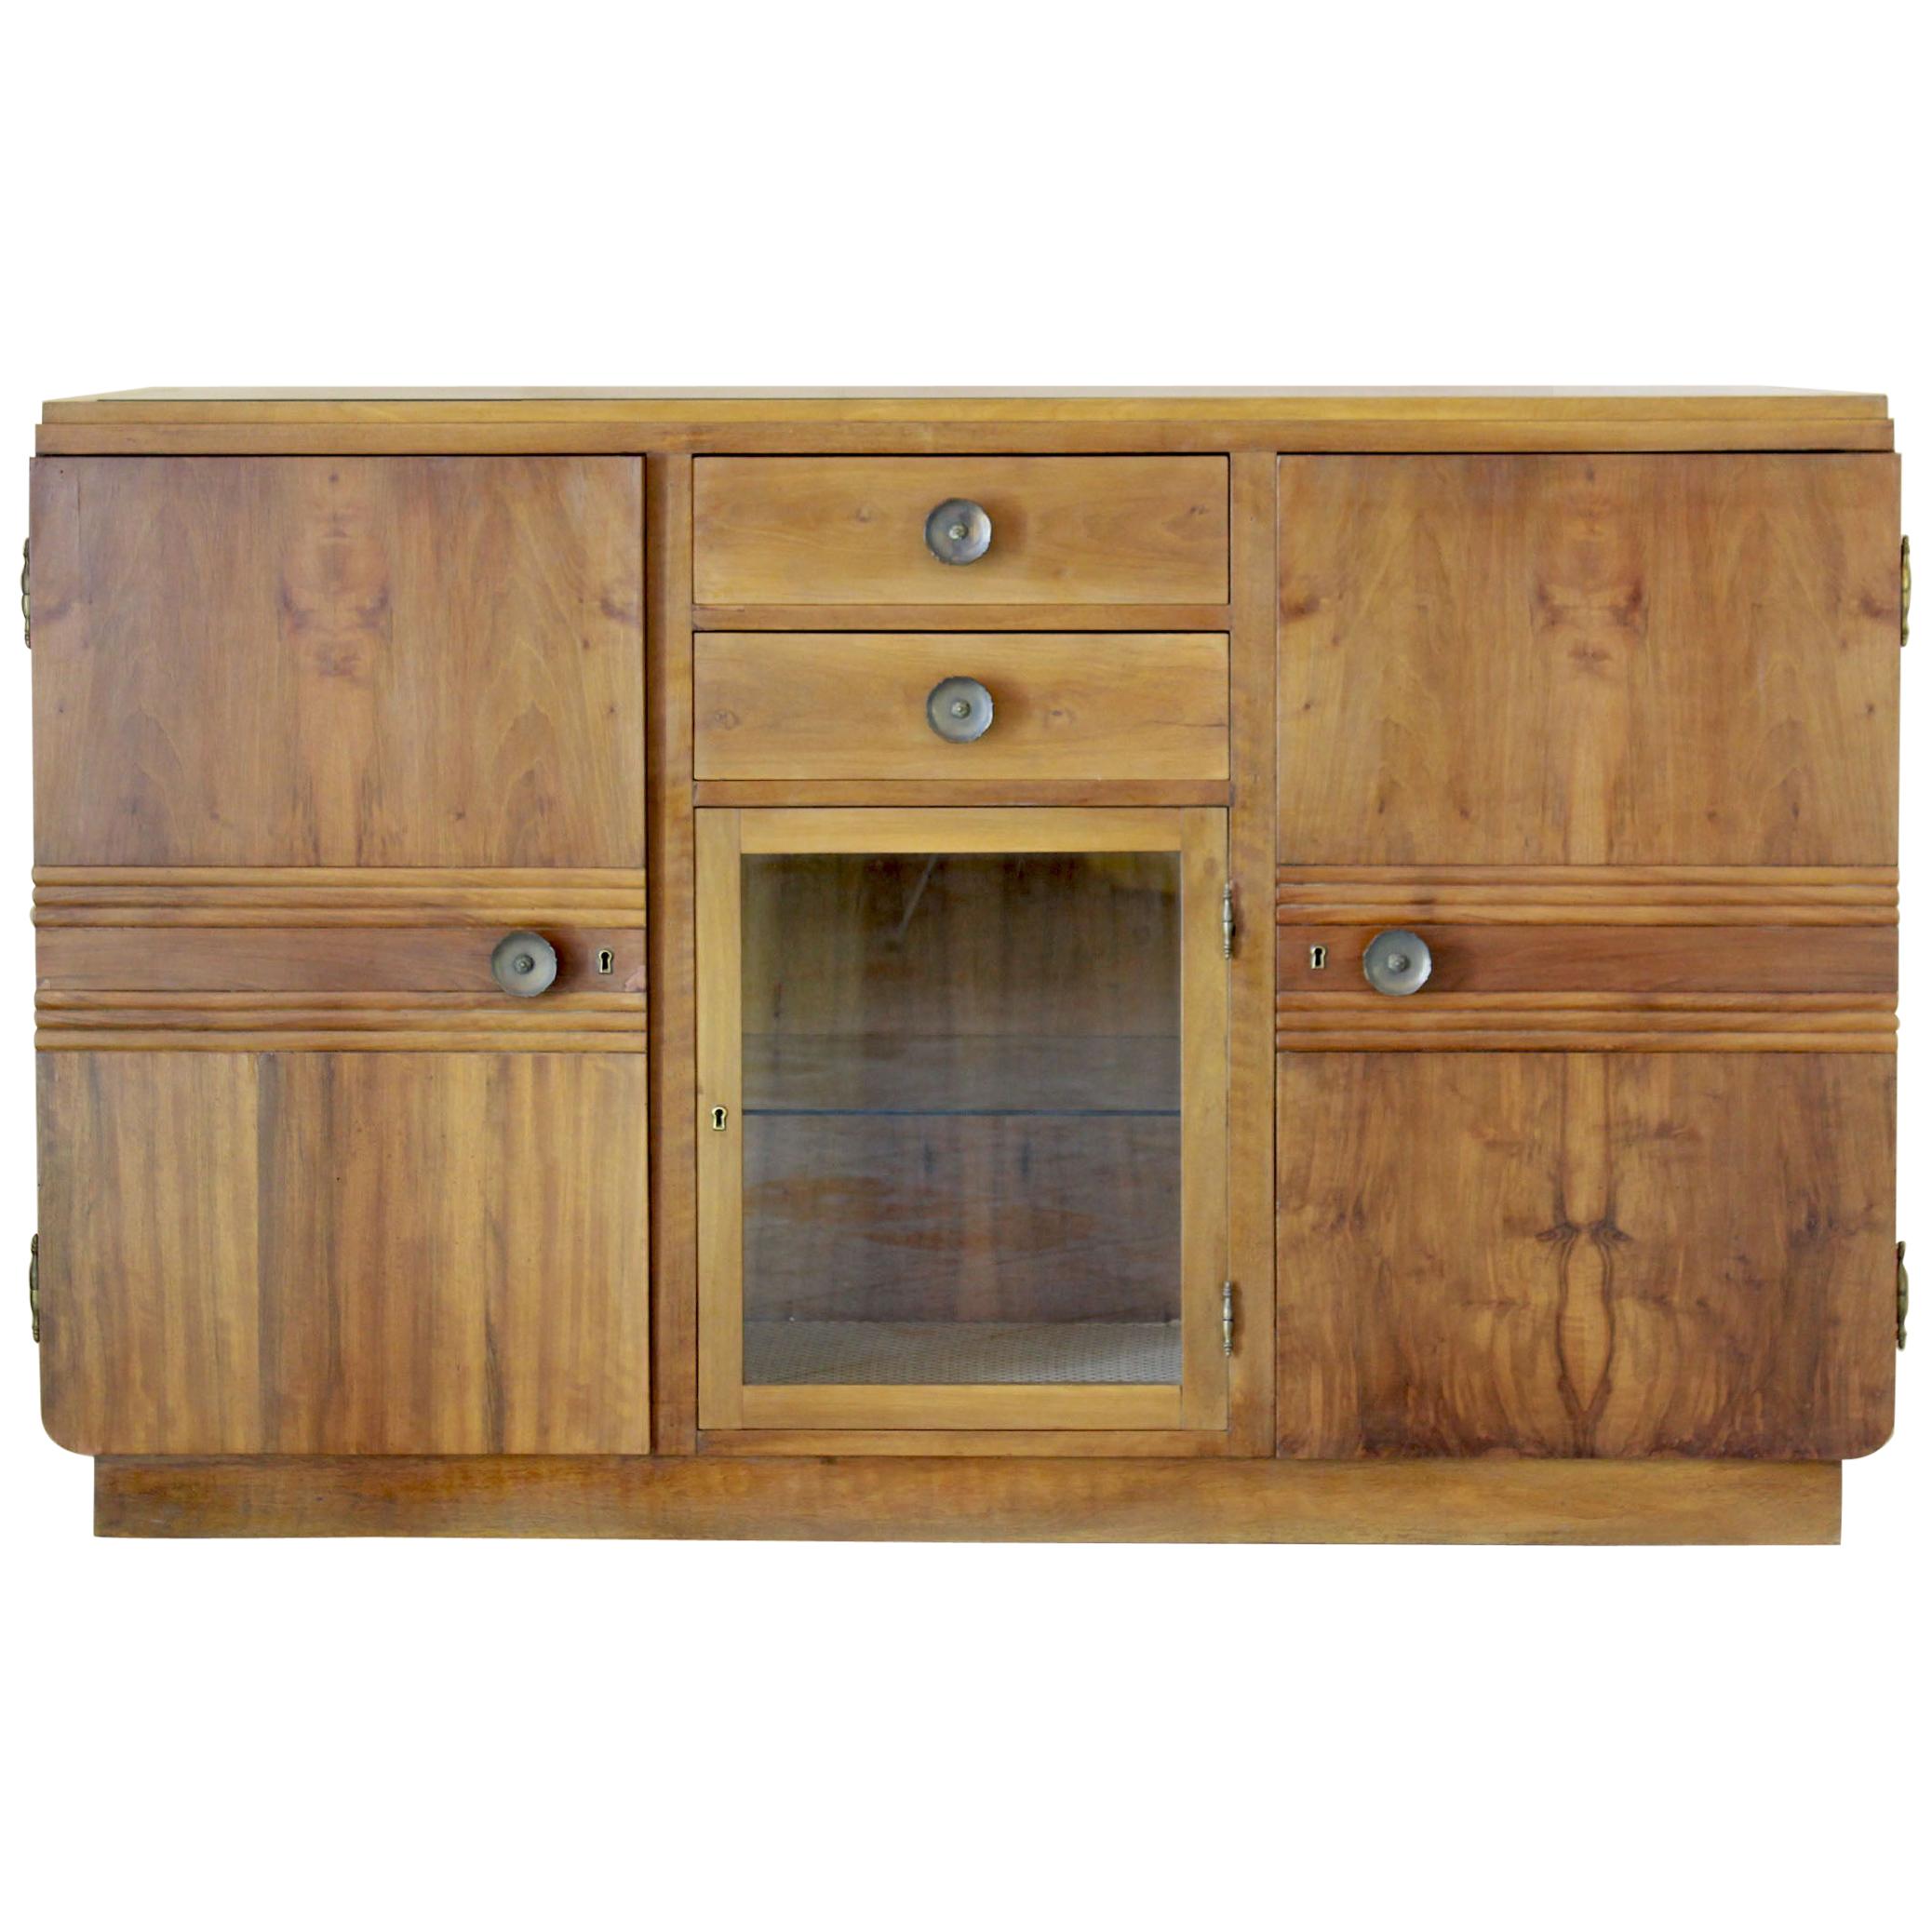 Case Pieces and Storage Cabinets Auctions